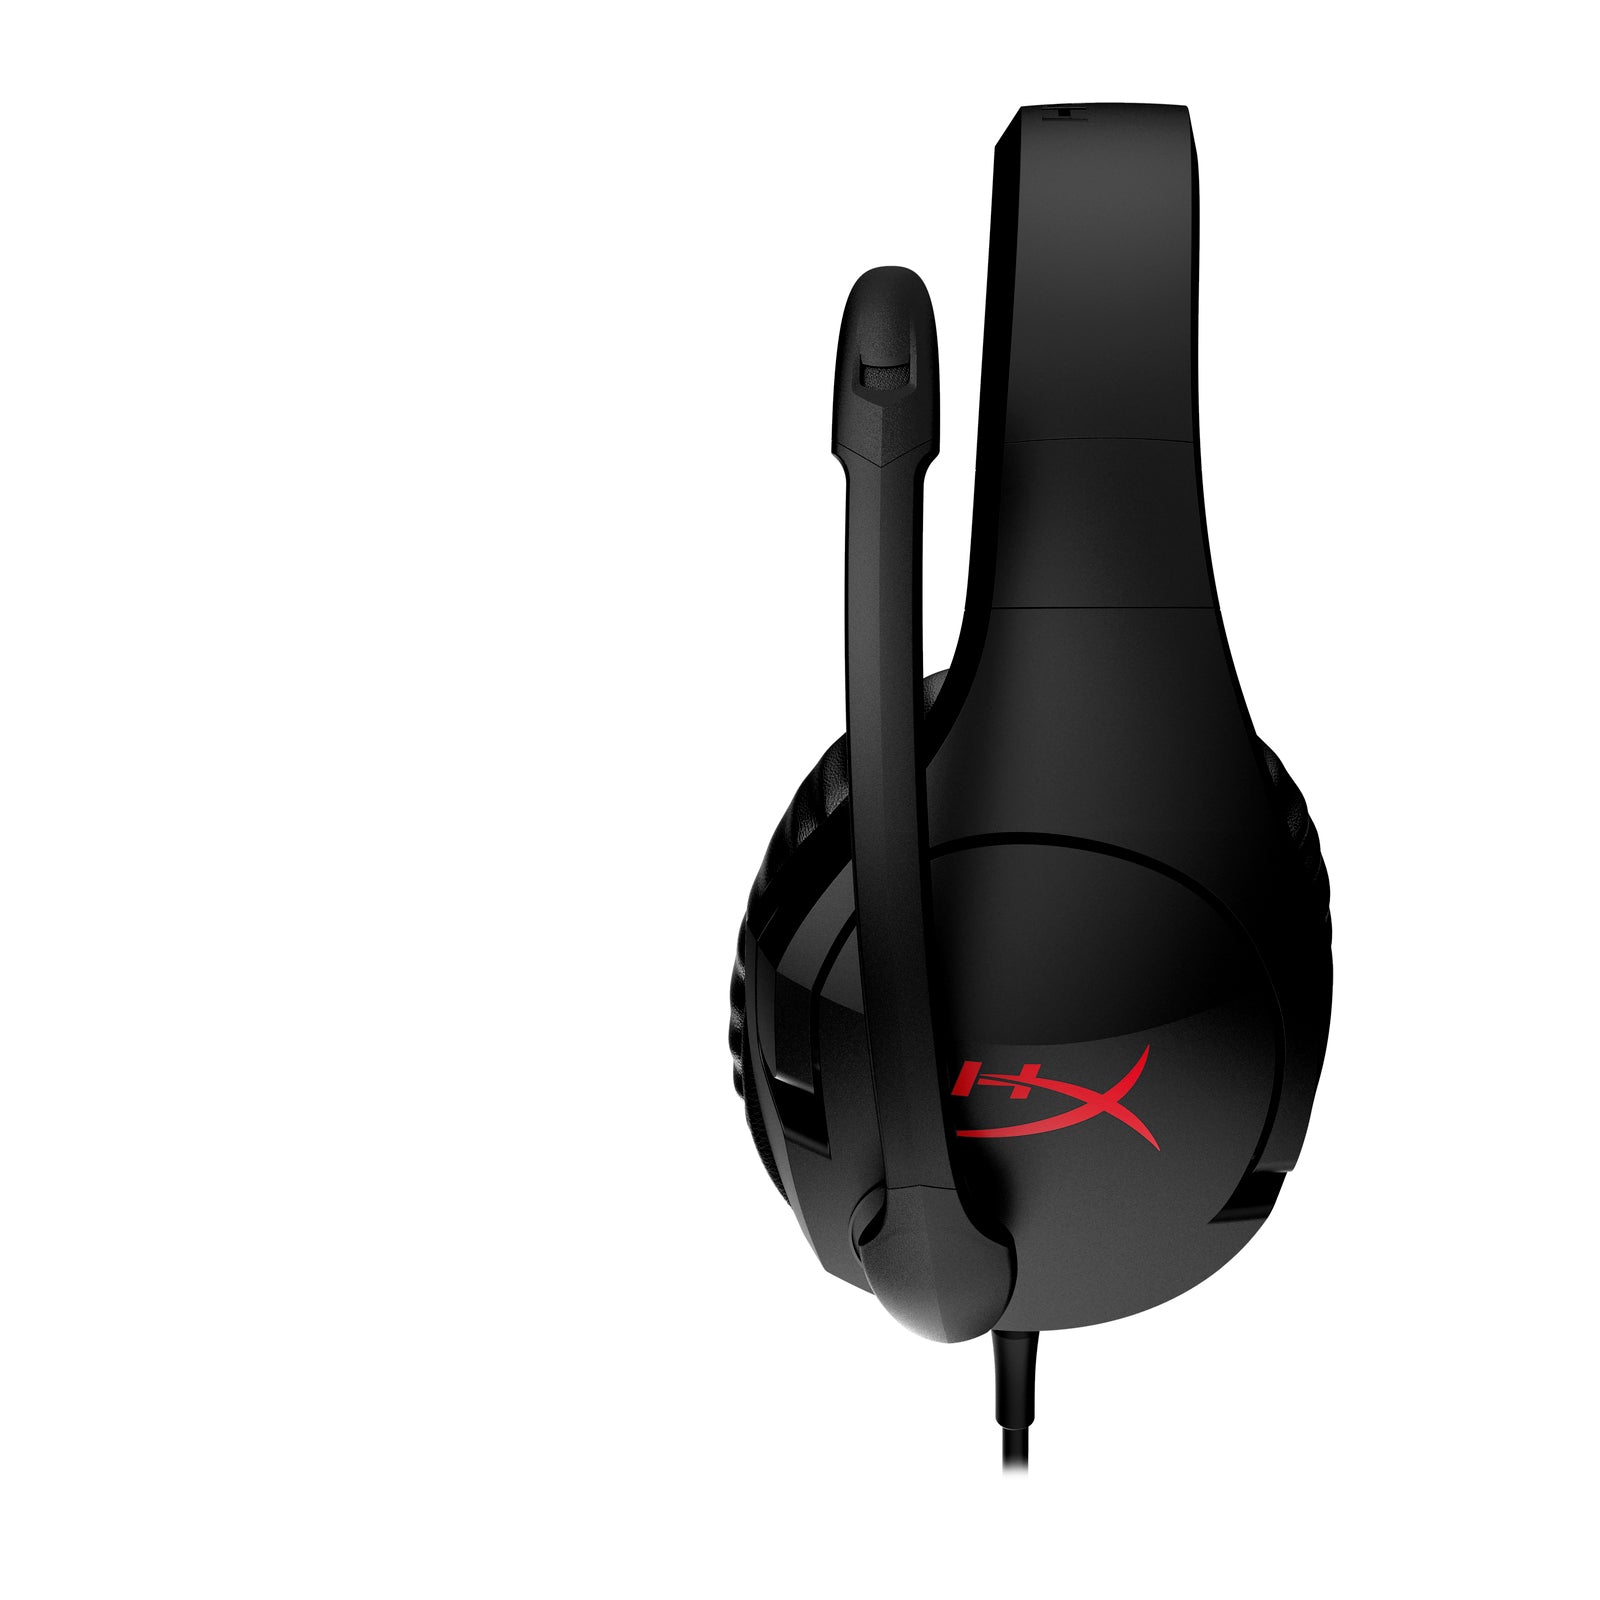 Cloud Stinger - Comfortable Gaming Headsets